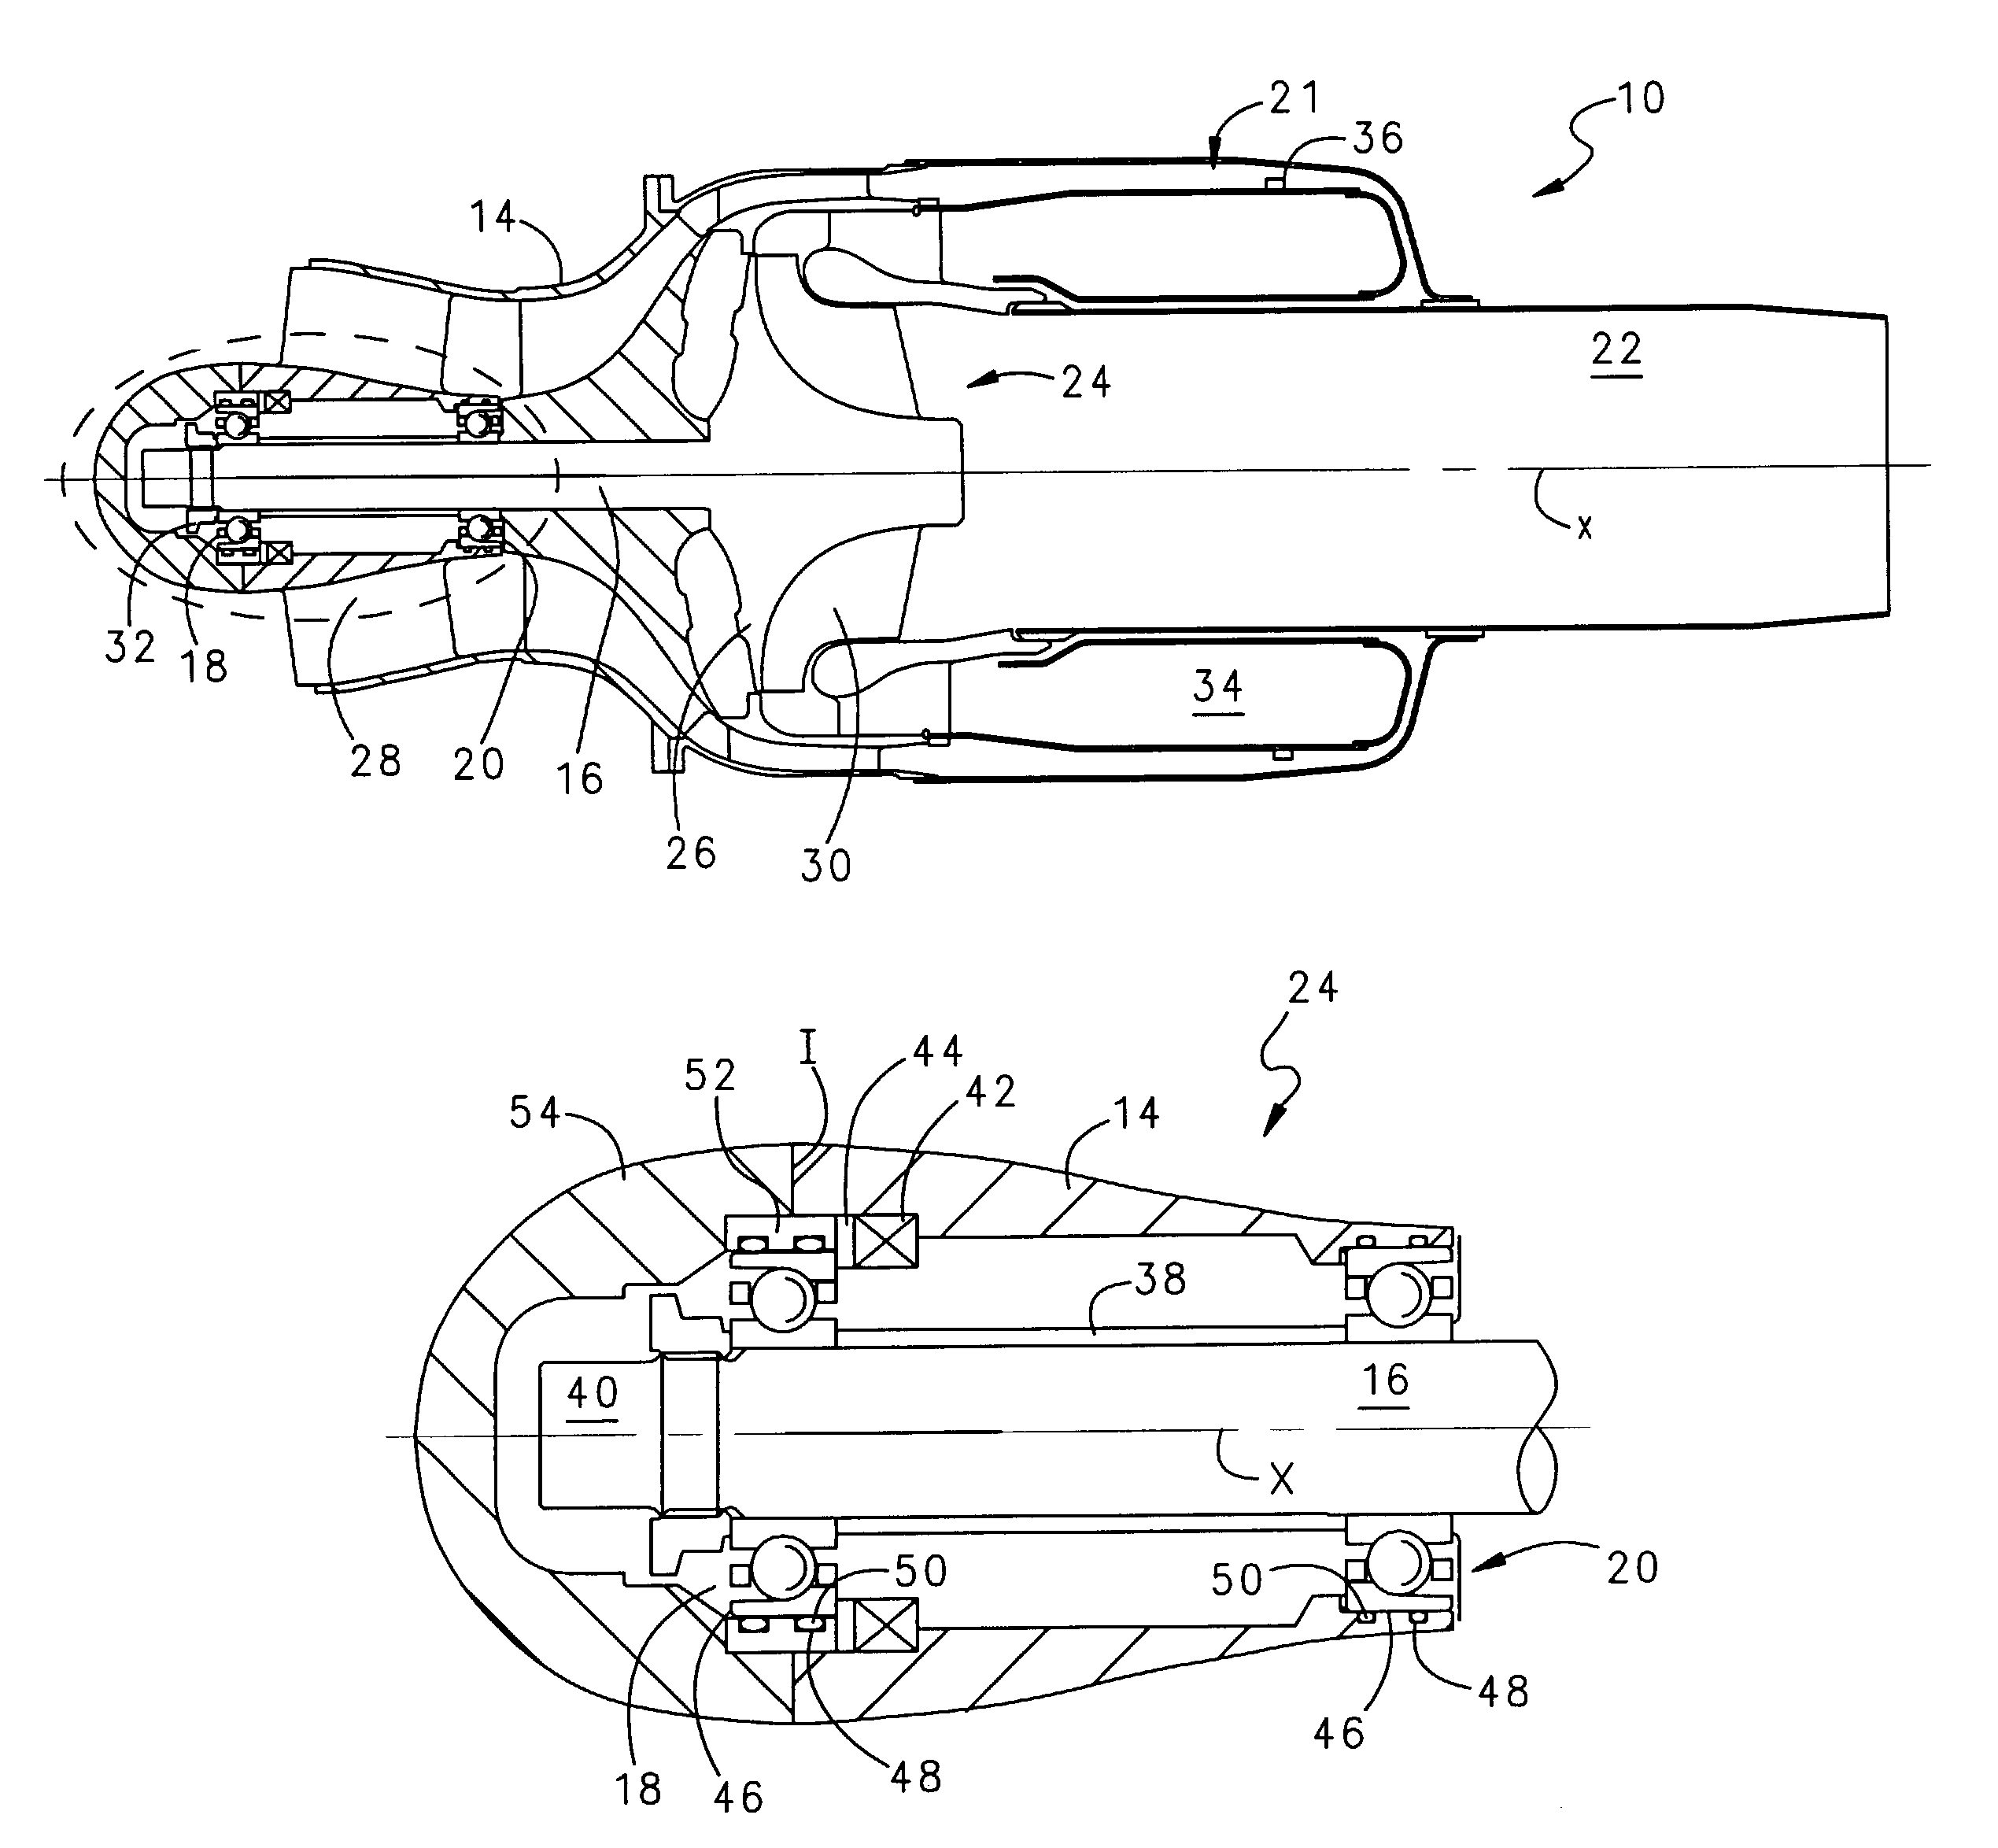 Damping system for an expendable gas turbine engine